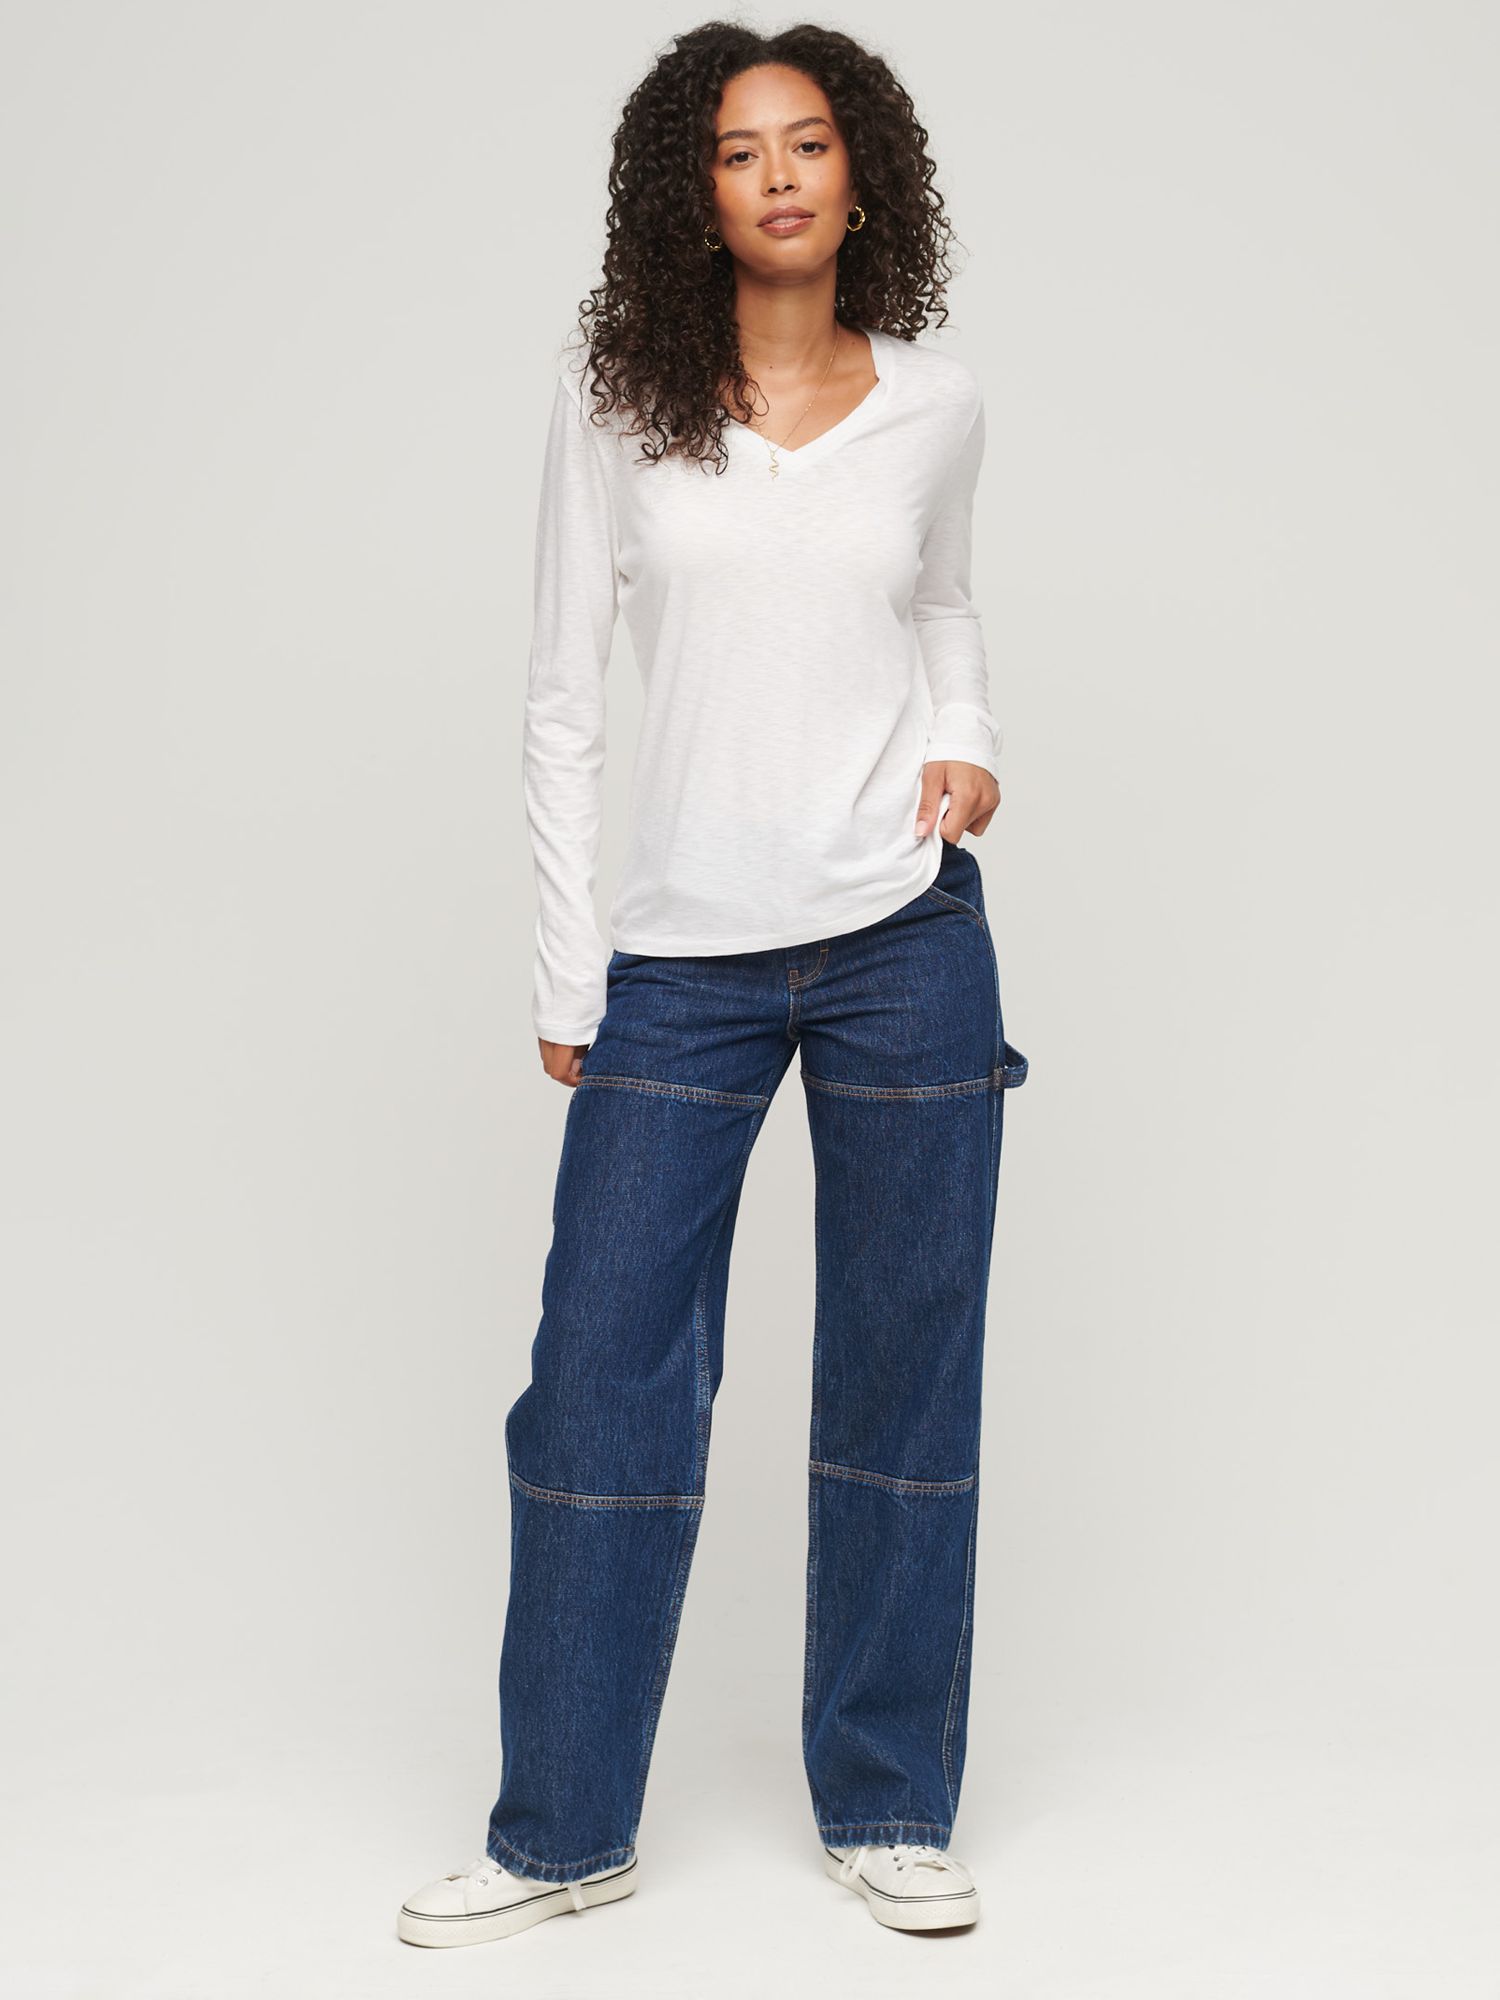 Superdry Long Sleeve Jersey V-Neck Top, Optic White at John Lewis & Partners